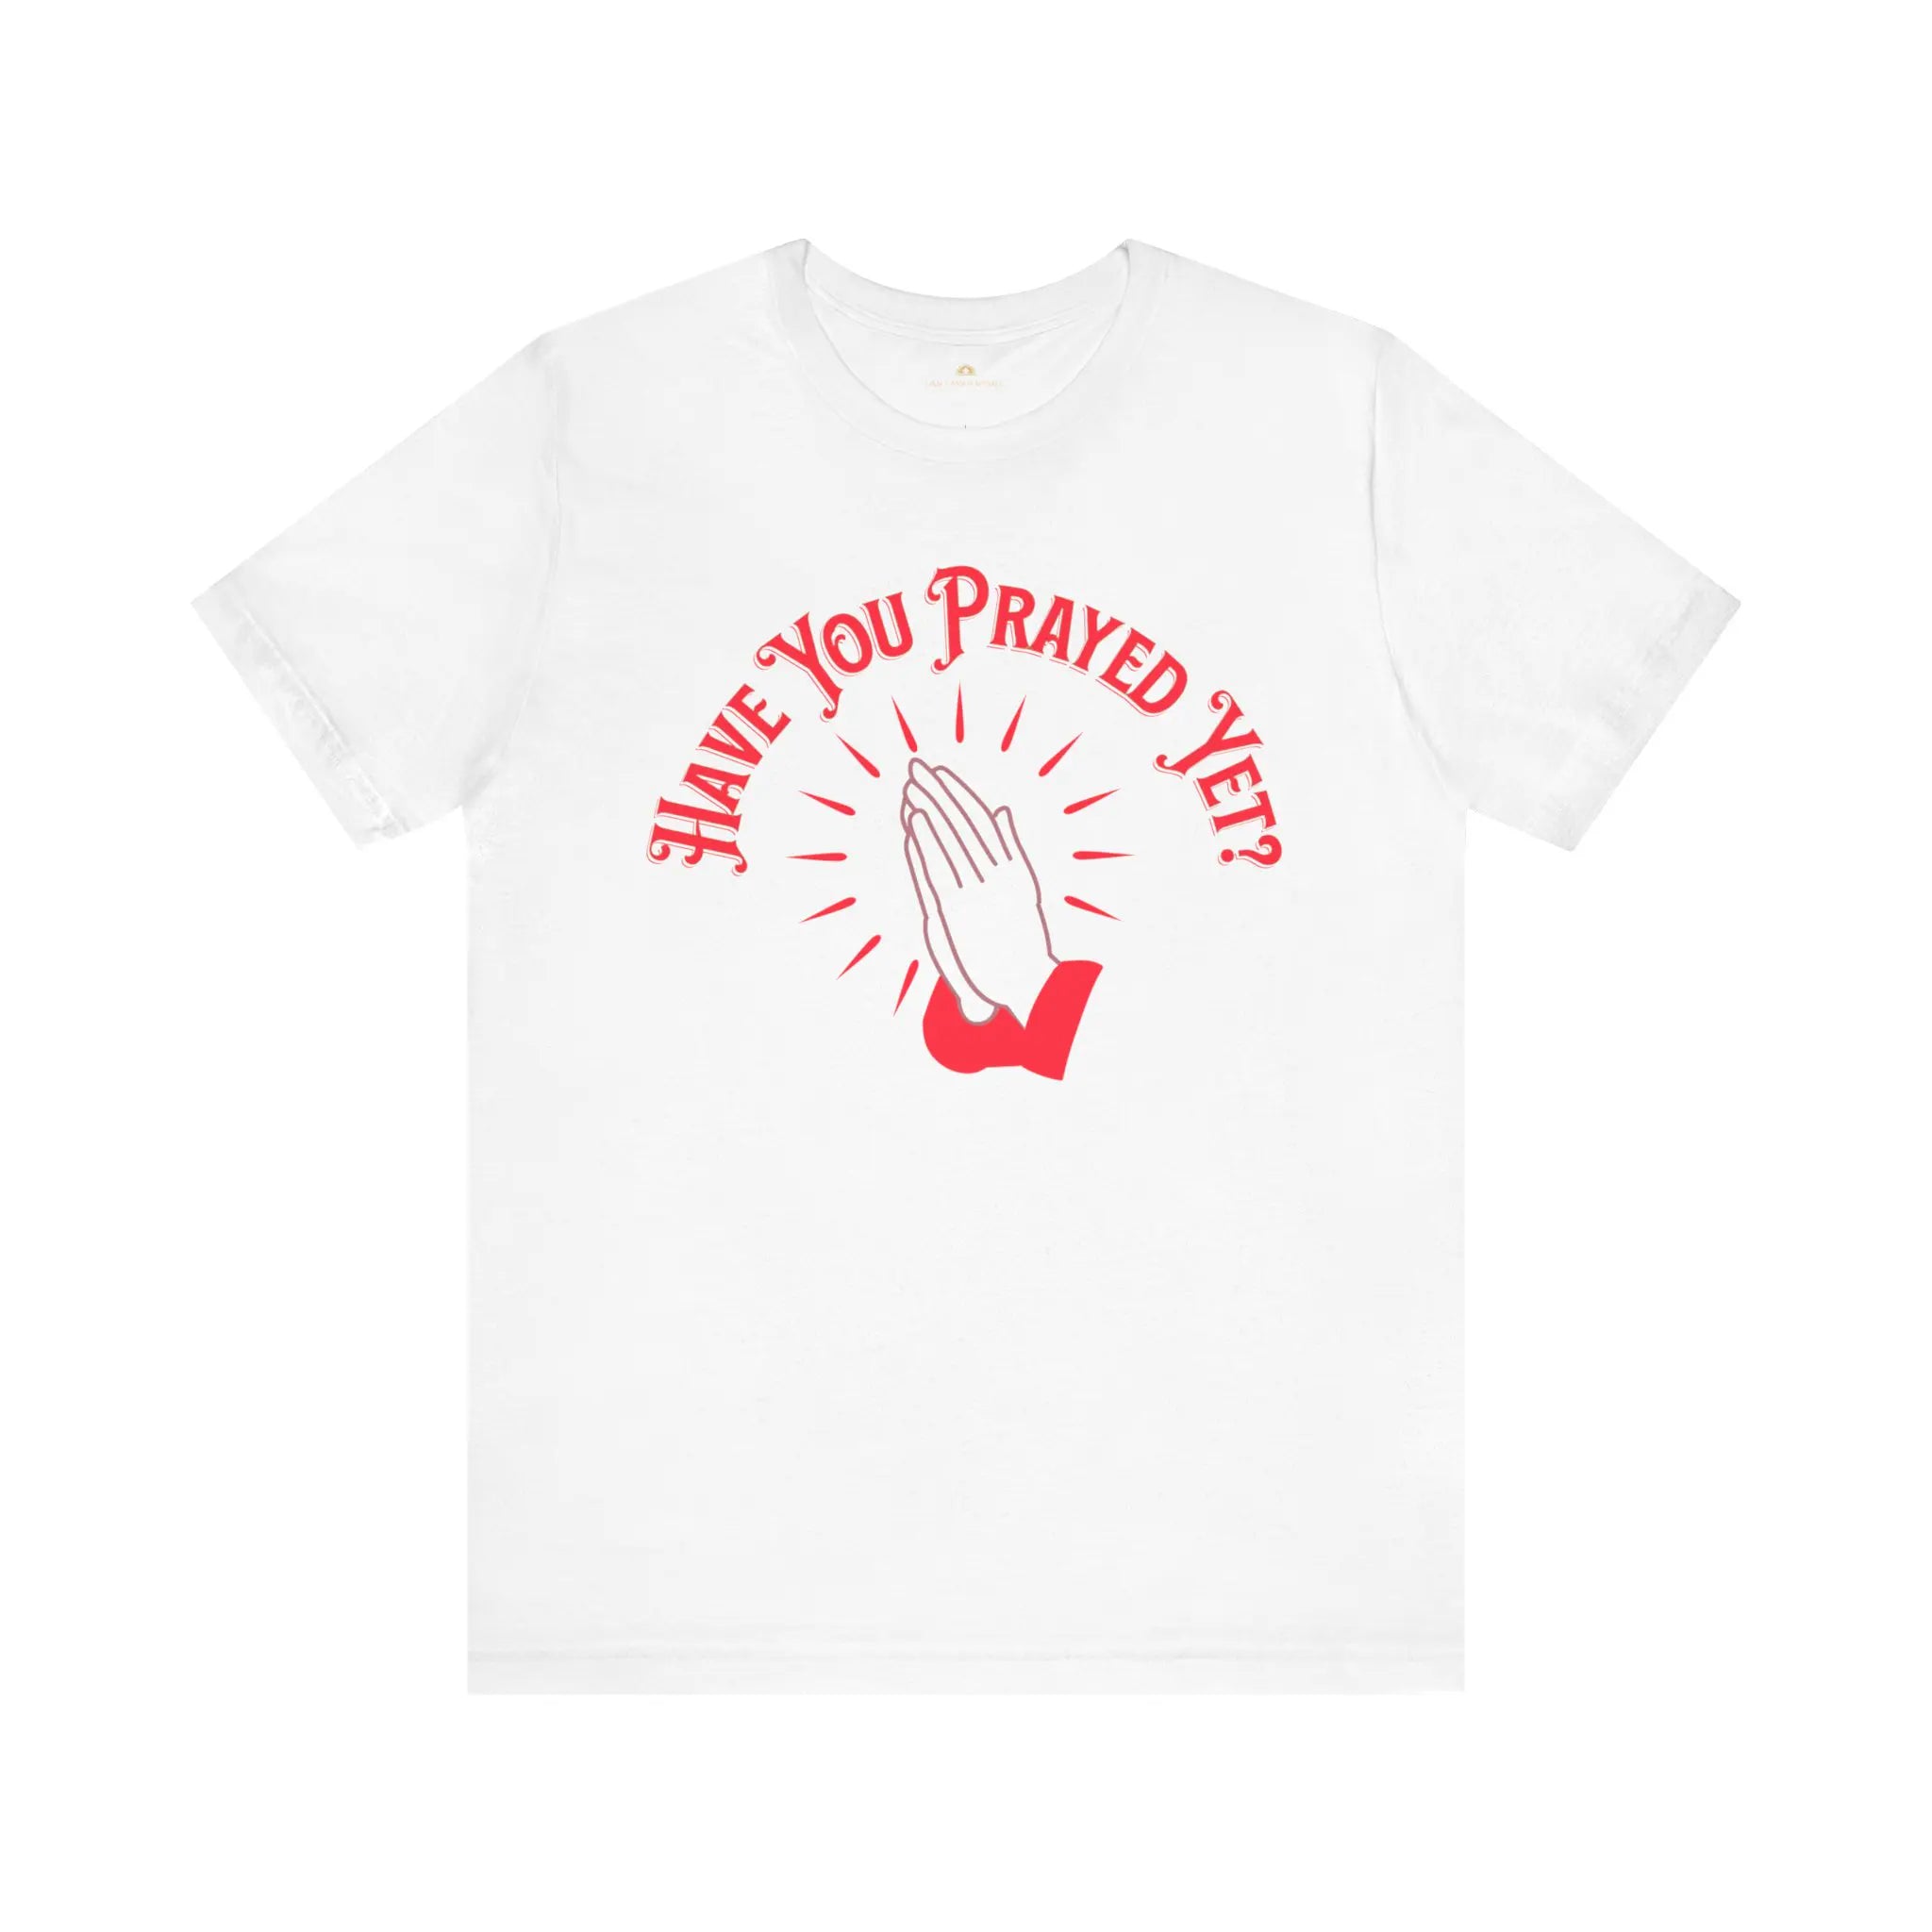 Have You Prayed Yet? Tee: Daily Reminder | Grace Based